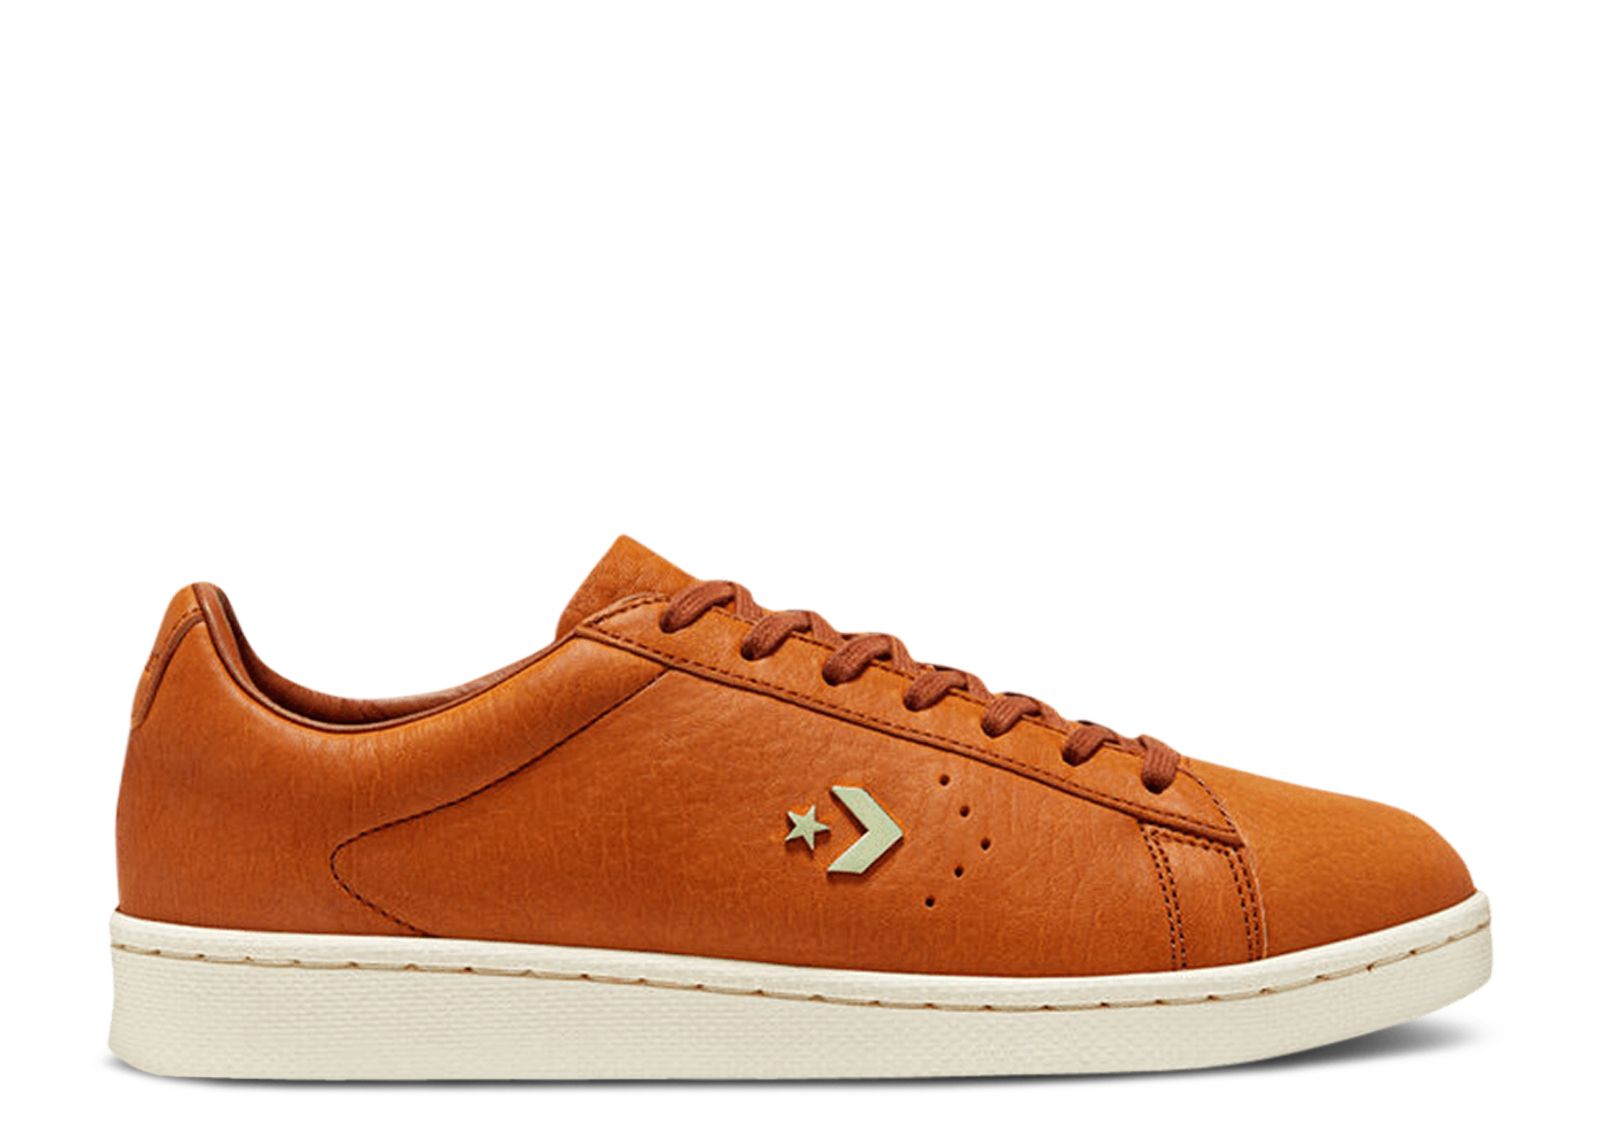 Кроссовки Converse Horween Leather Co. X Pro Leather Low 'Potters Clay', коричневый кроссовки converse horween leather co x pro leather low hazelnut розовый